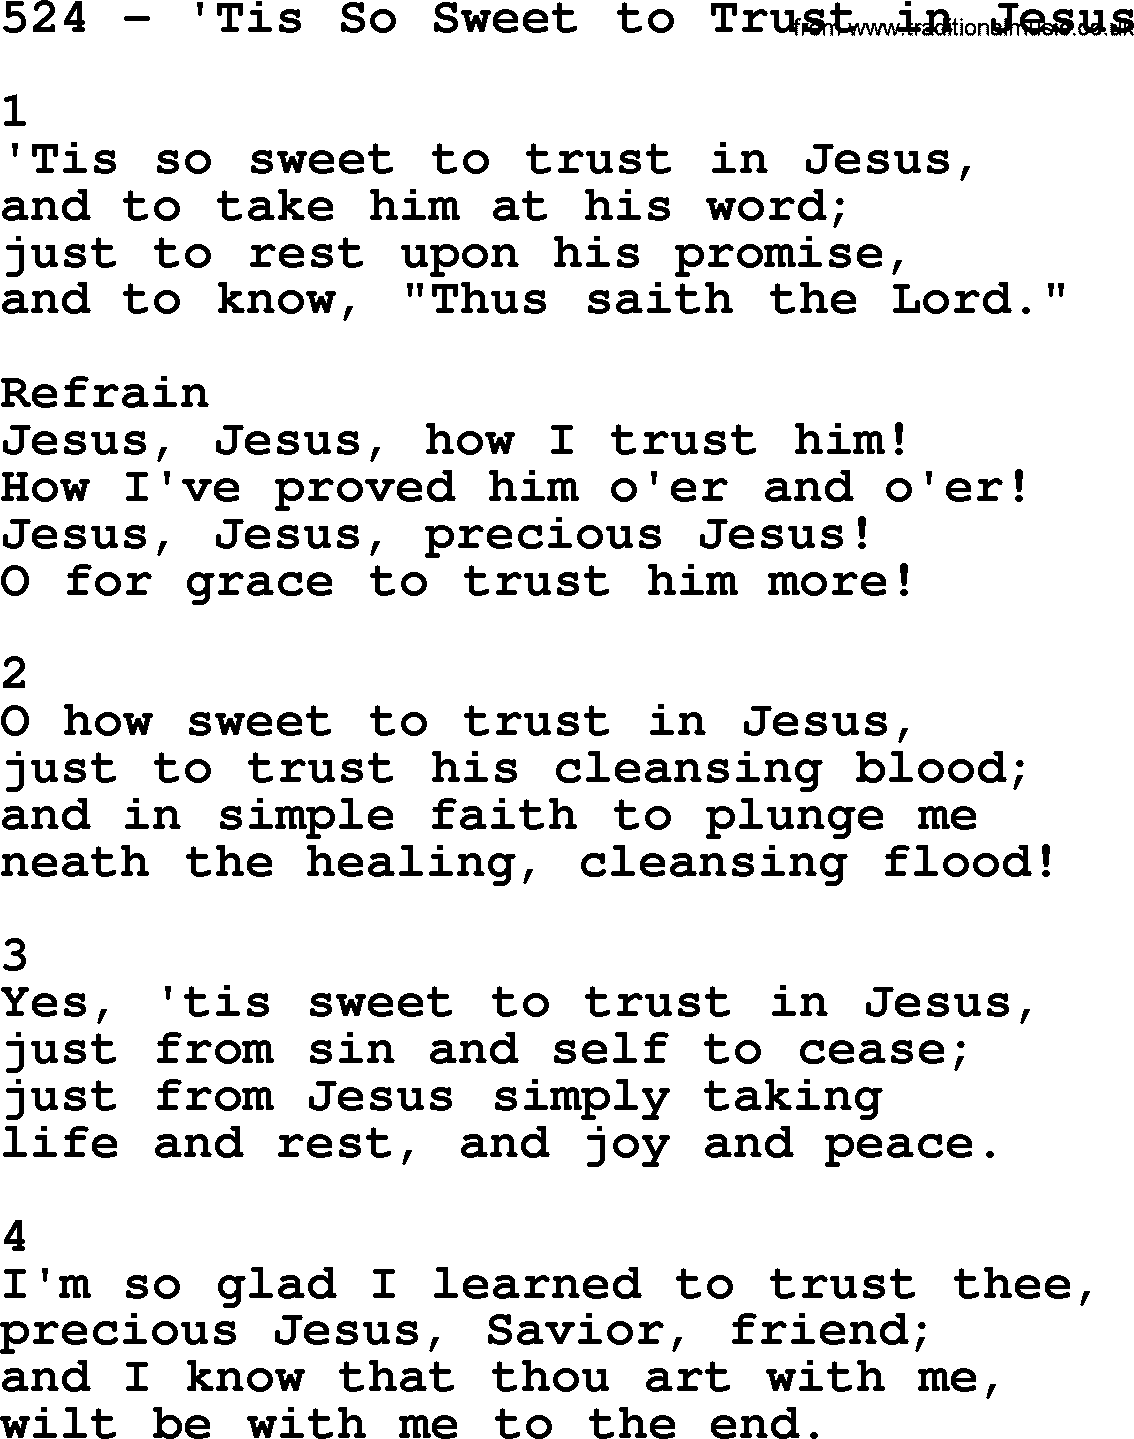 Complete Adventis Hymnal, title: 524-'Tis So Sweet To Trust In Jesus, with lyrics, midi, mp3, powerpoints(PPT) and PDF,